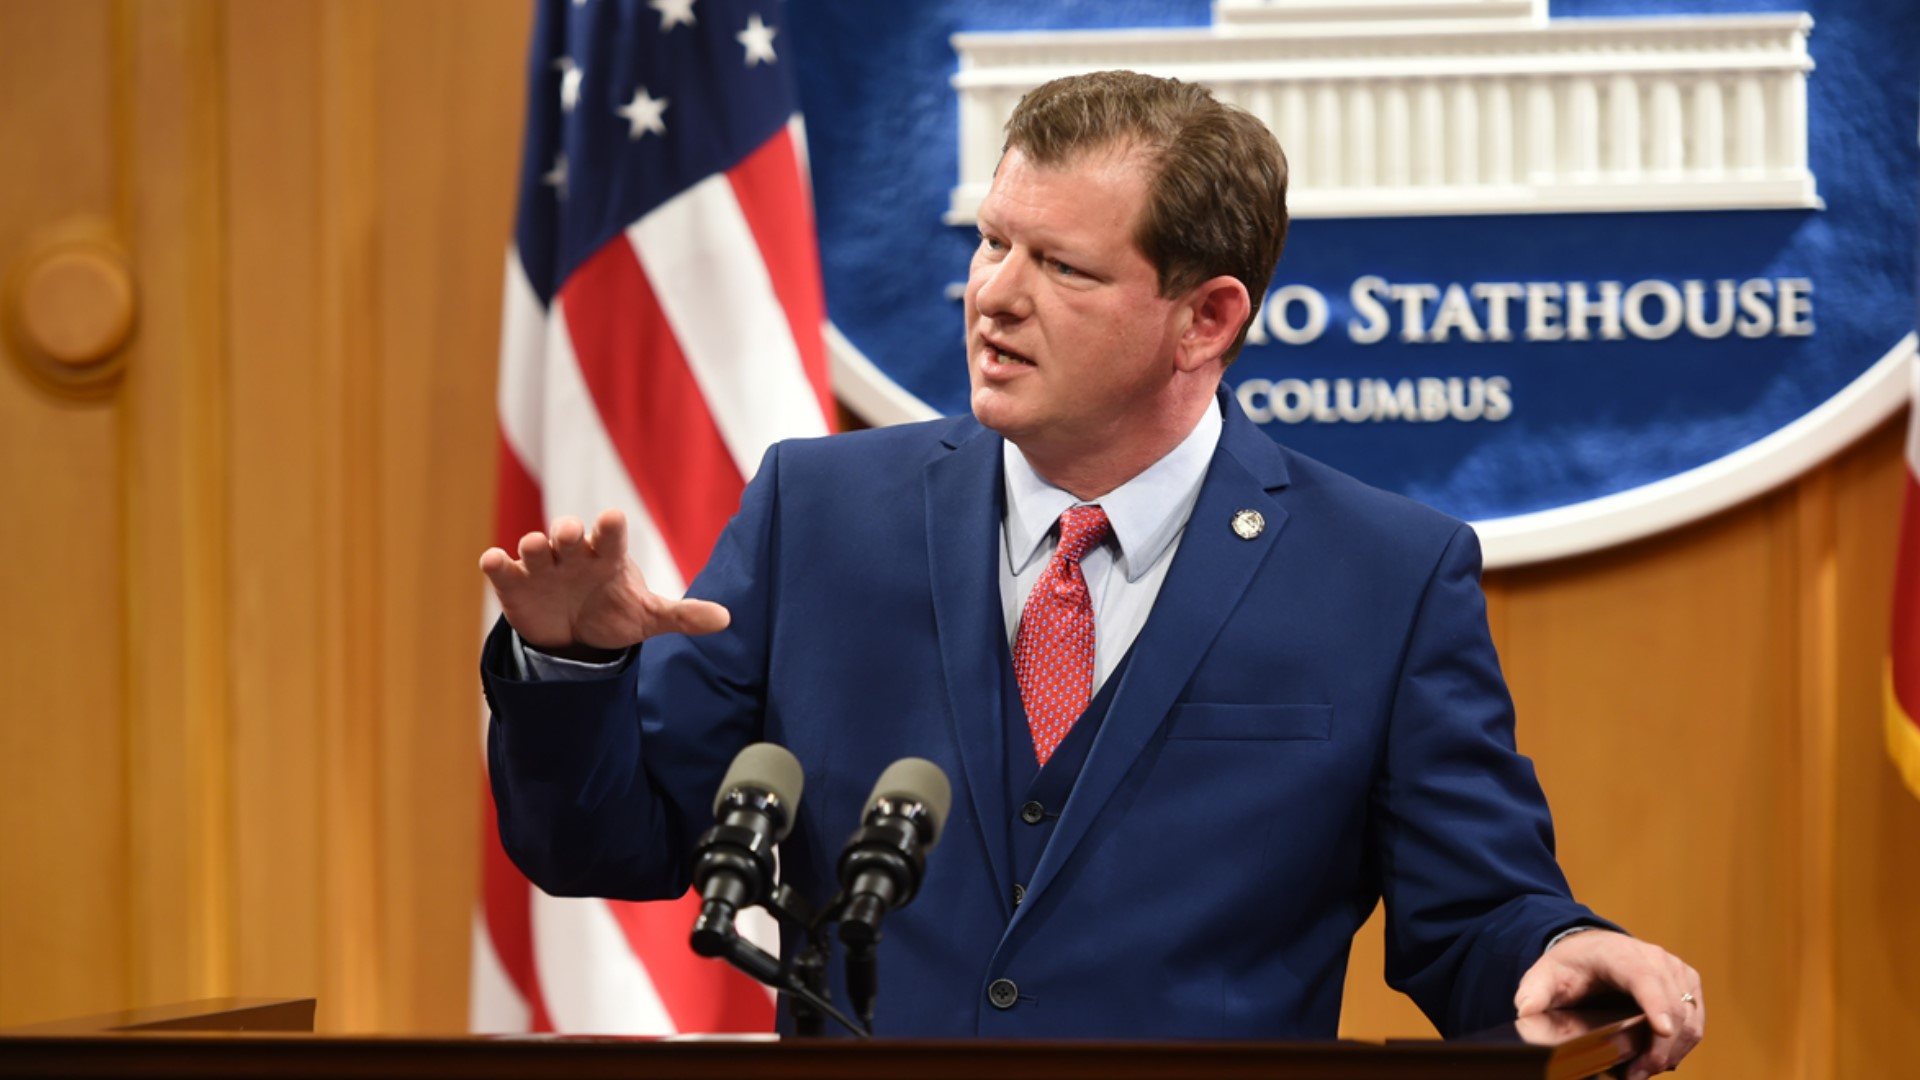 Rep. Stephens won the seat Tuesday with significant Democratic support after Rep. Derek Merrin was selected to be the speaker by the Republican House caucus.